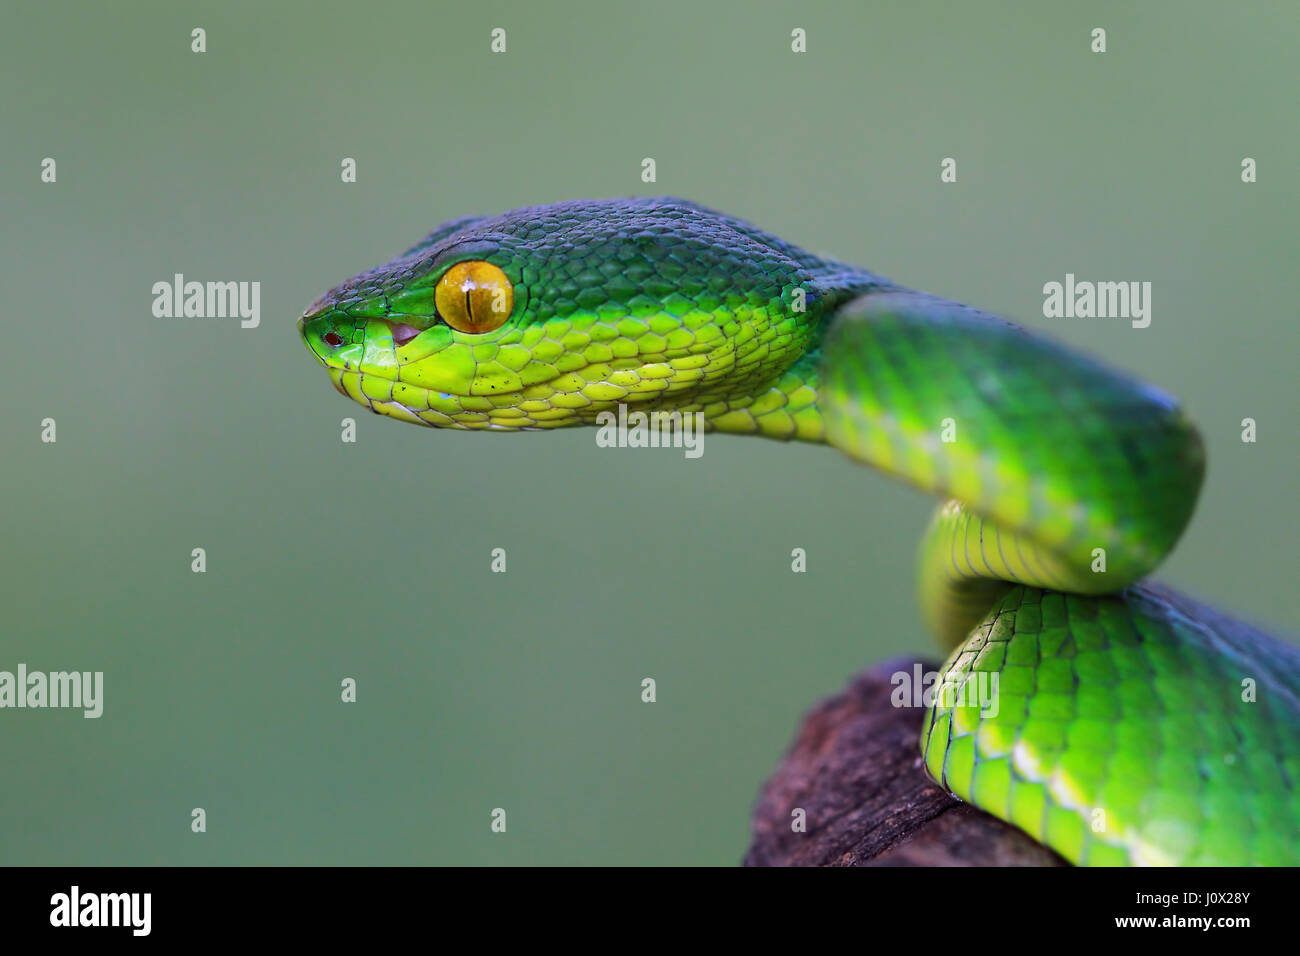 Side view of a Viper snake head, Indonesia Stock Photo